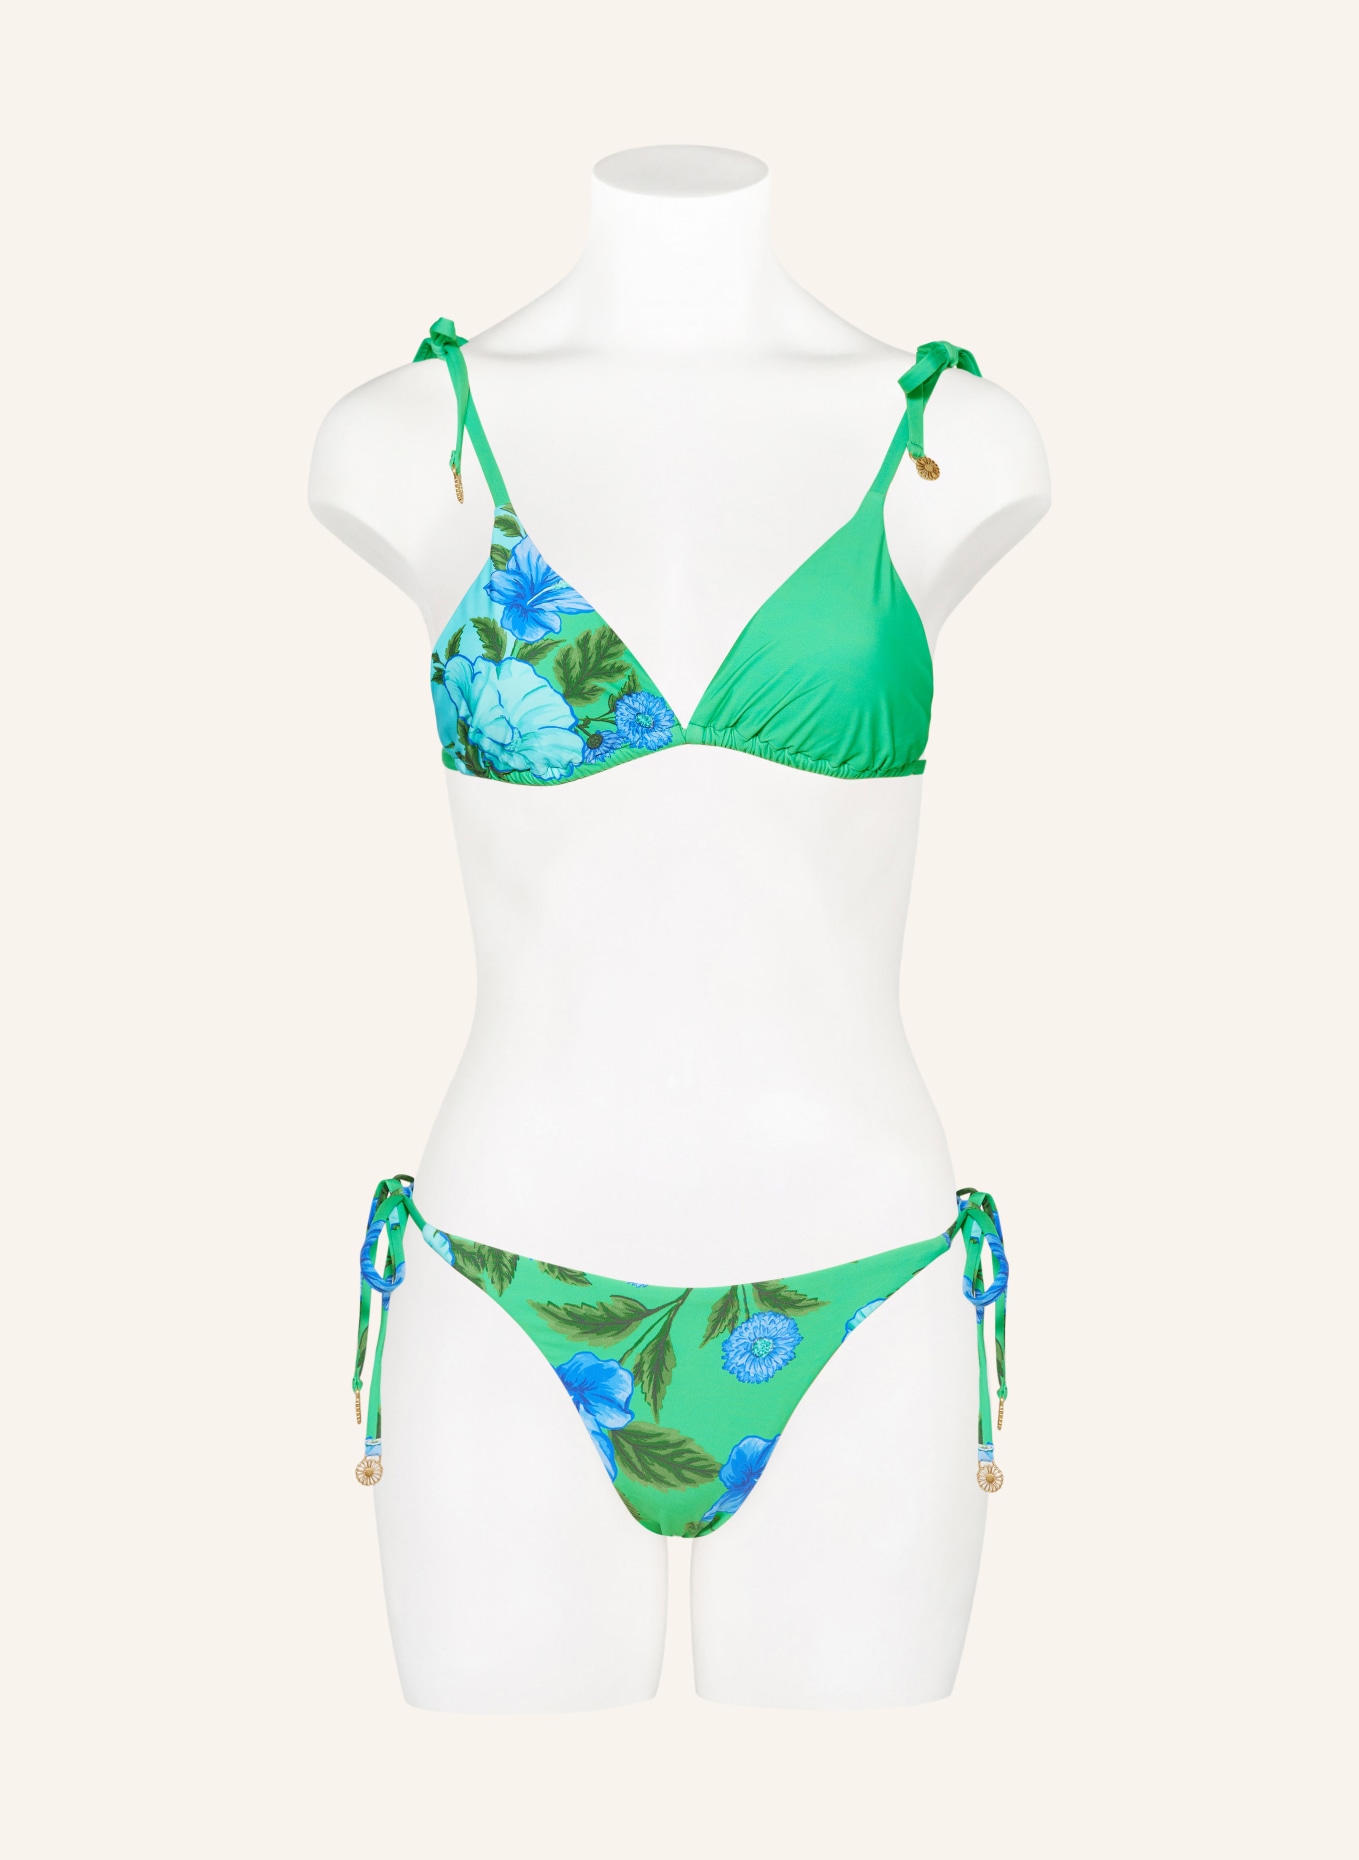 SEAFOLLY Bralette bikini top GARDEN PARTY, Color: GREEN/ BLUE/ TURQUOISE (Image 2)